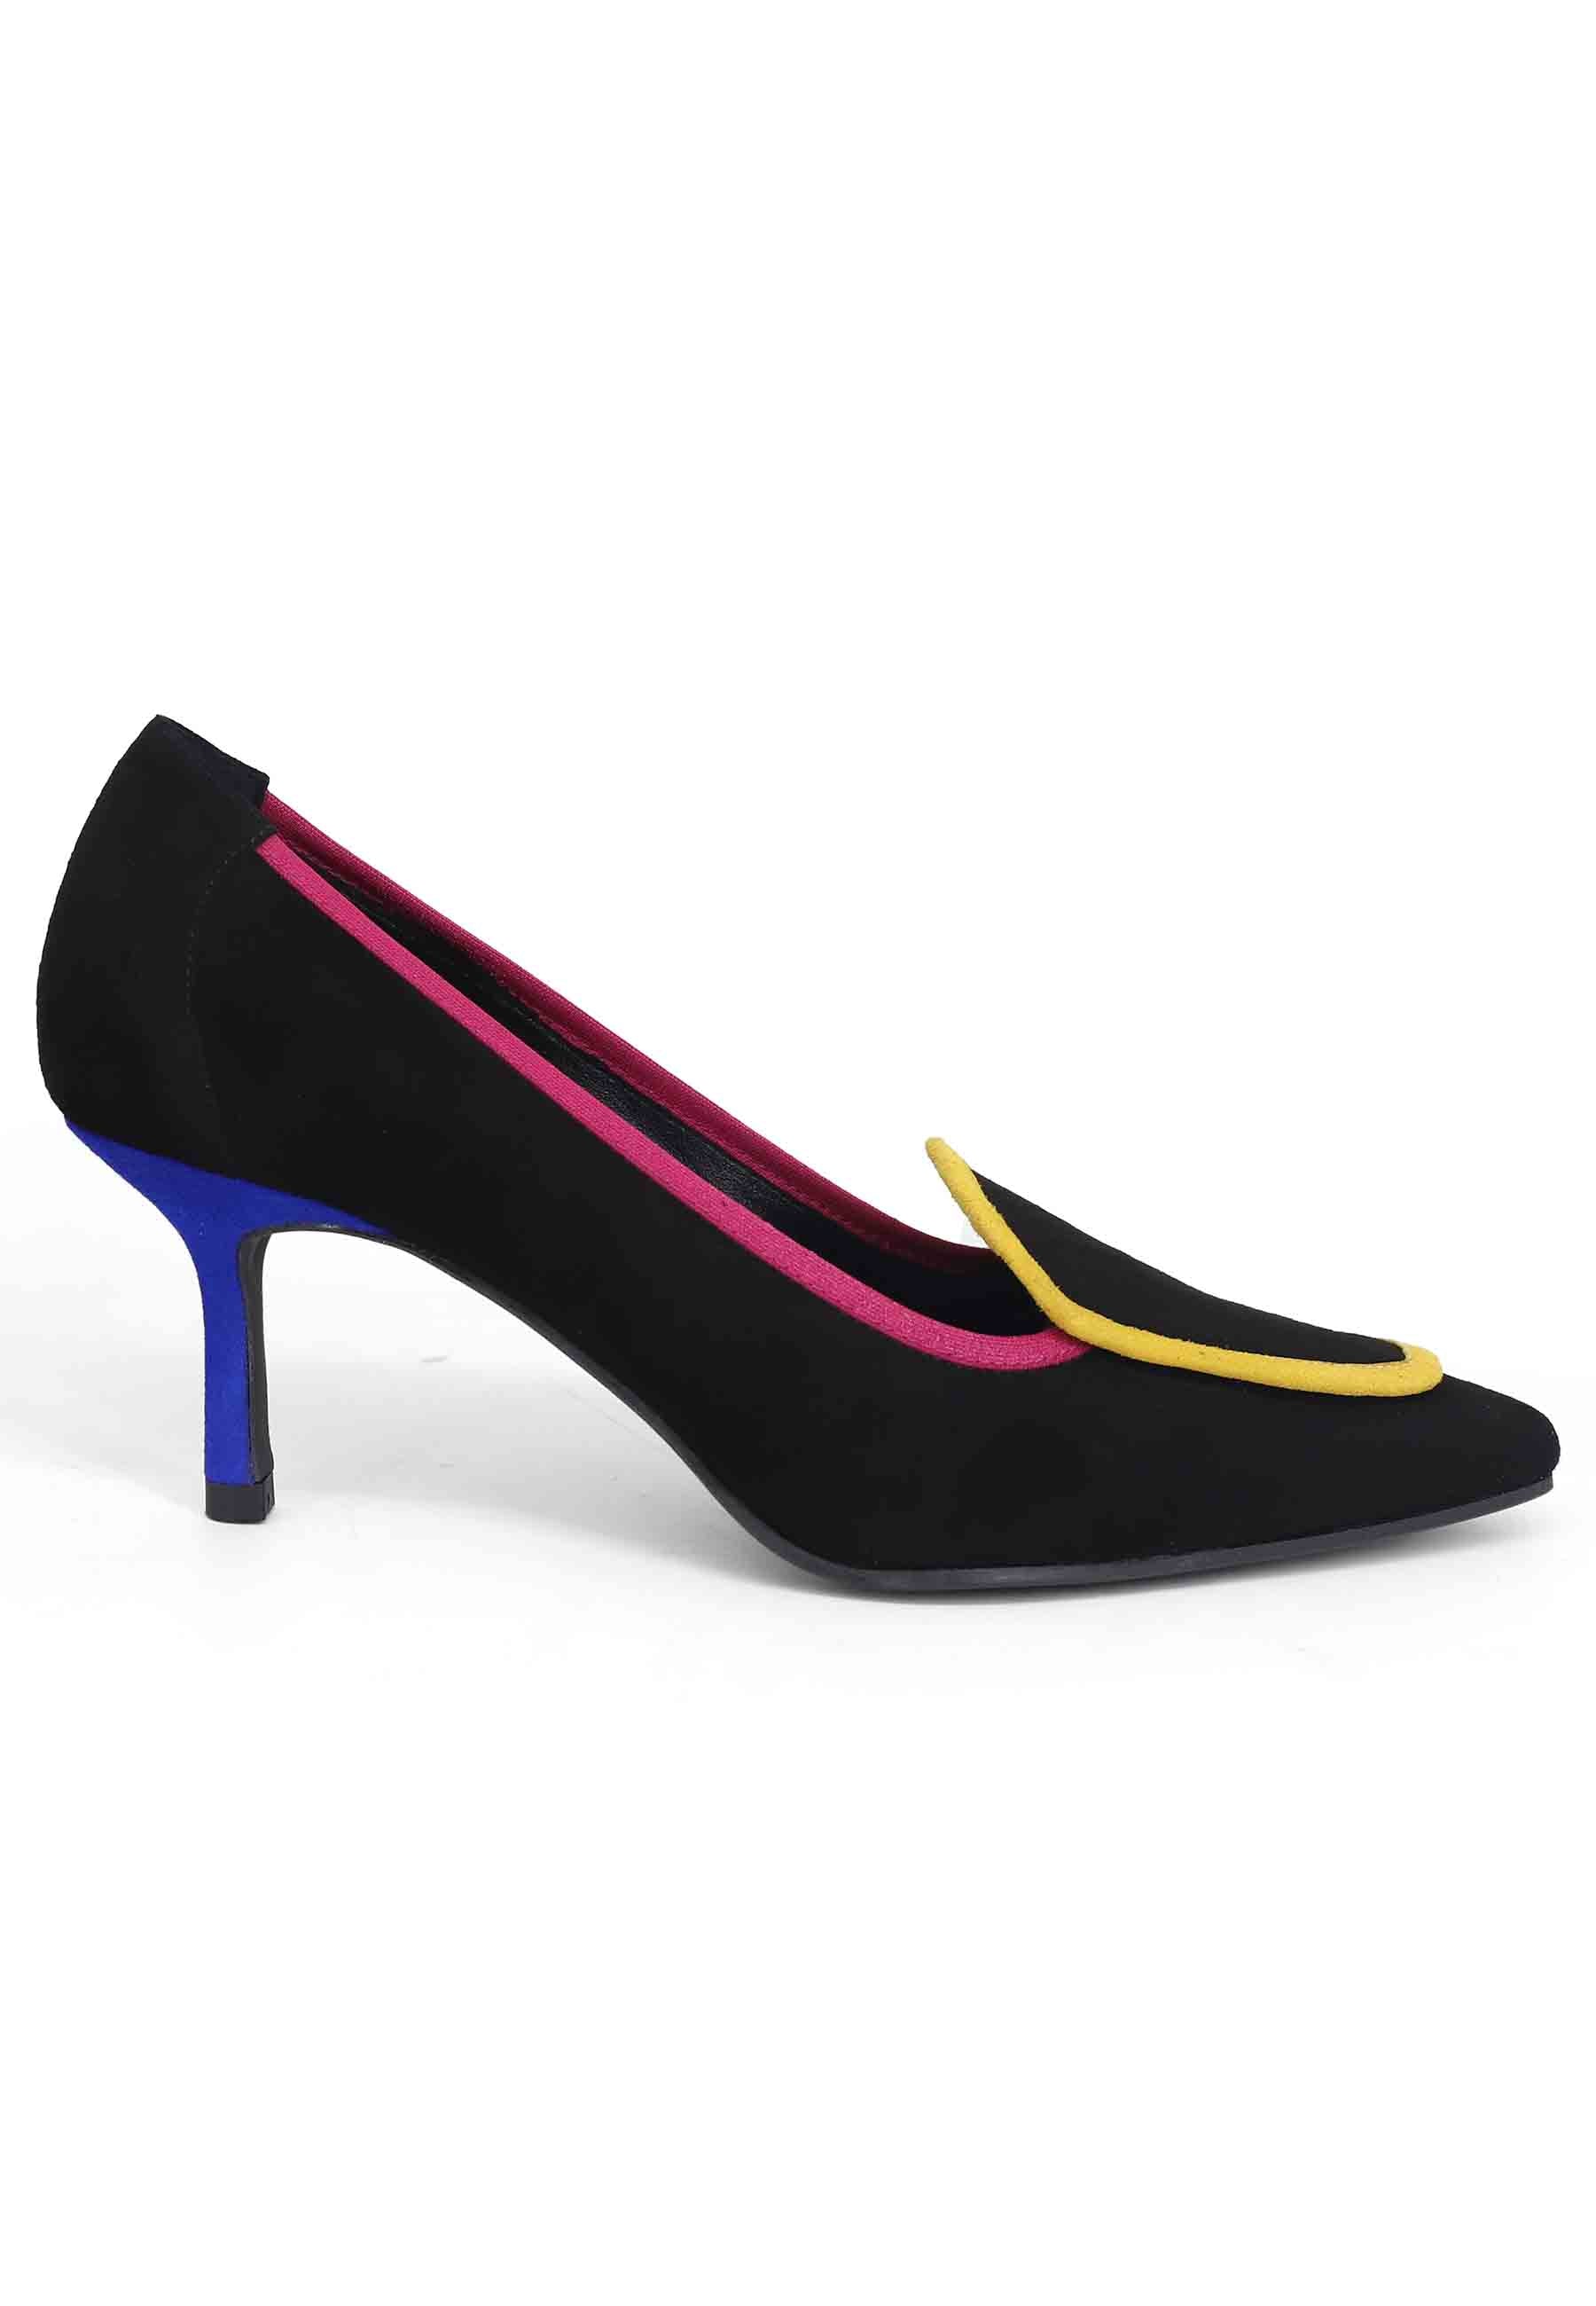 Women's decollete in black suede with multicolored inserts